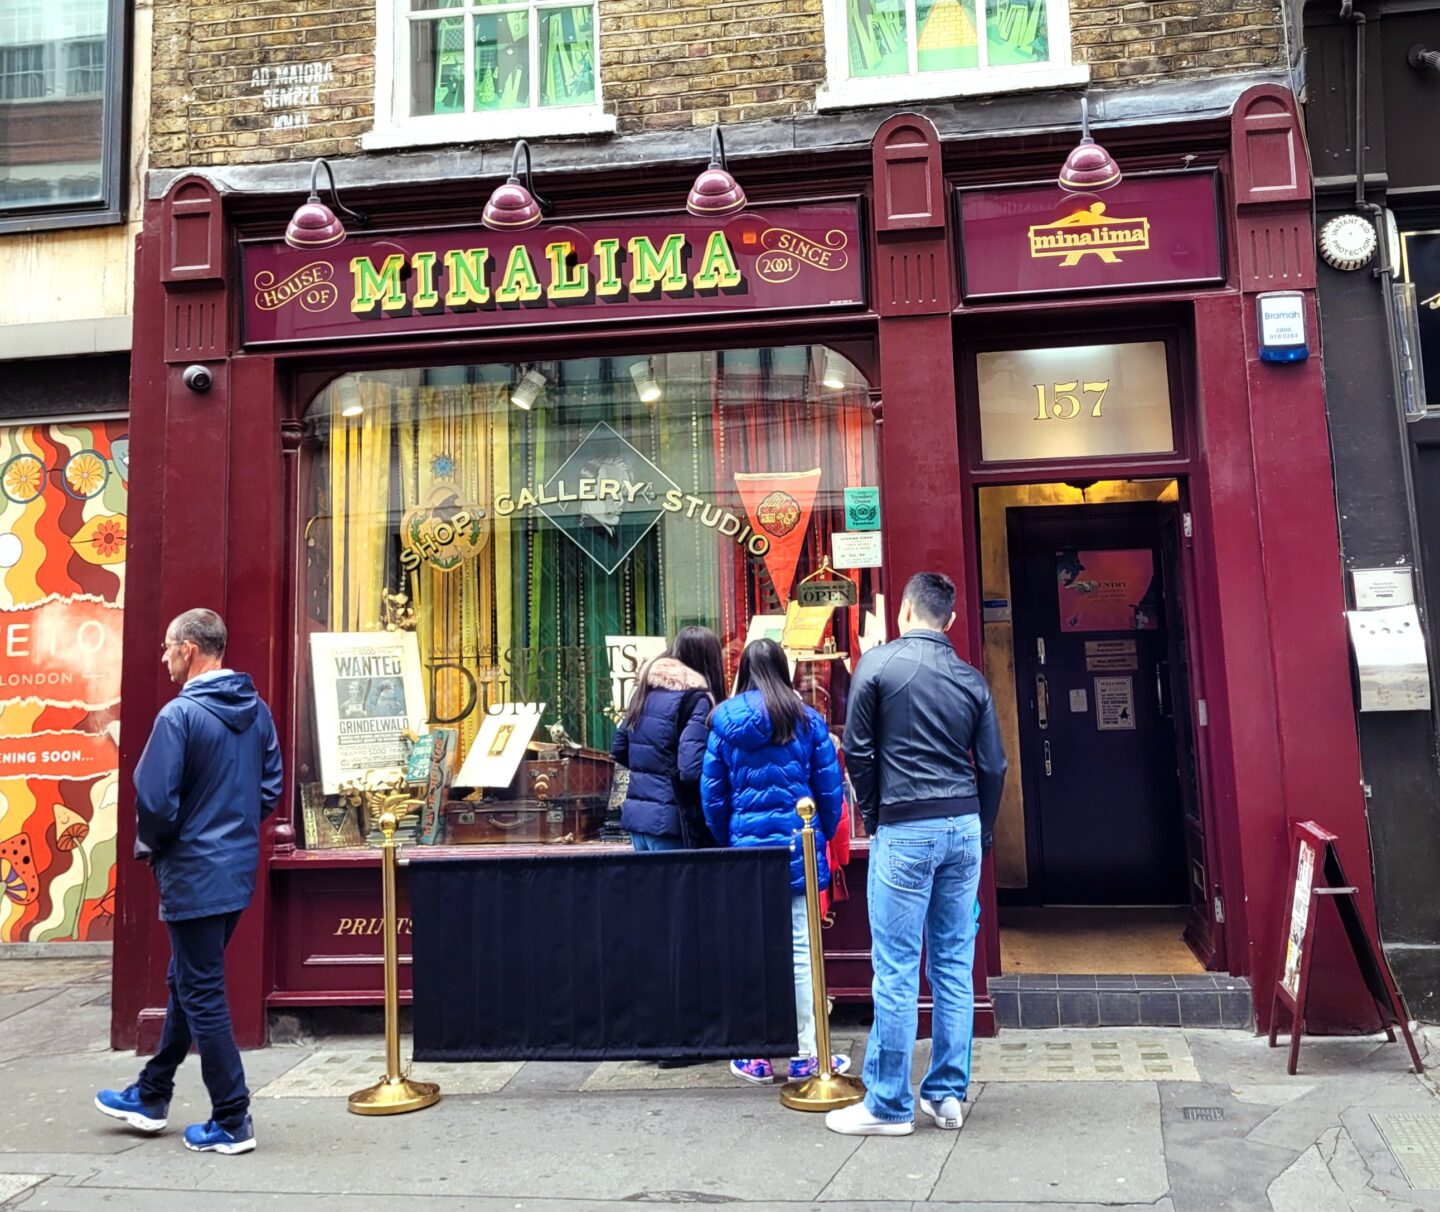 House of MinaLima in Londen